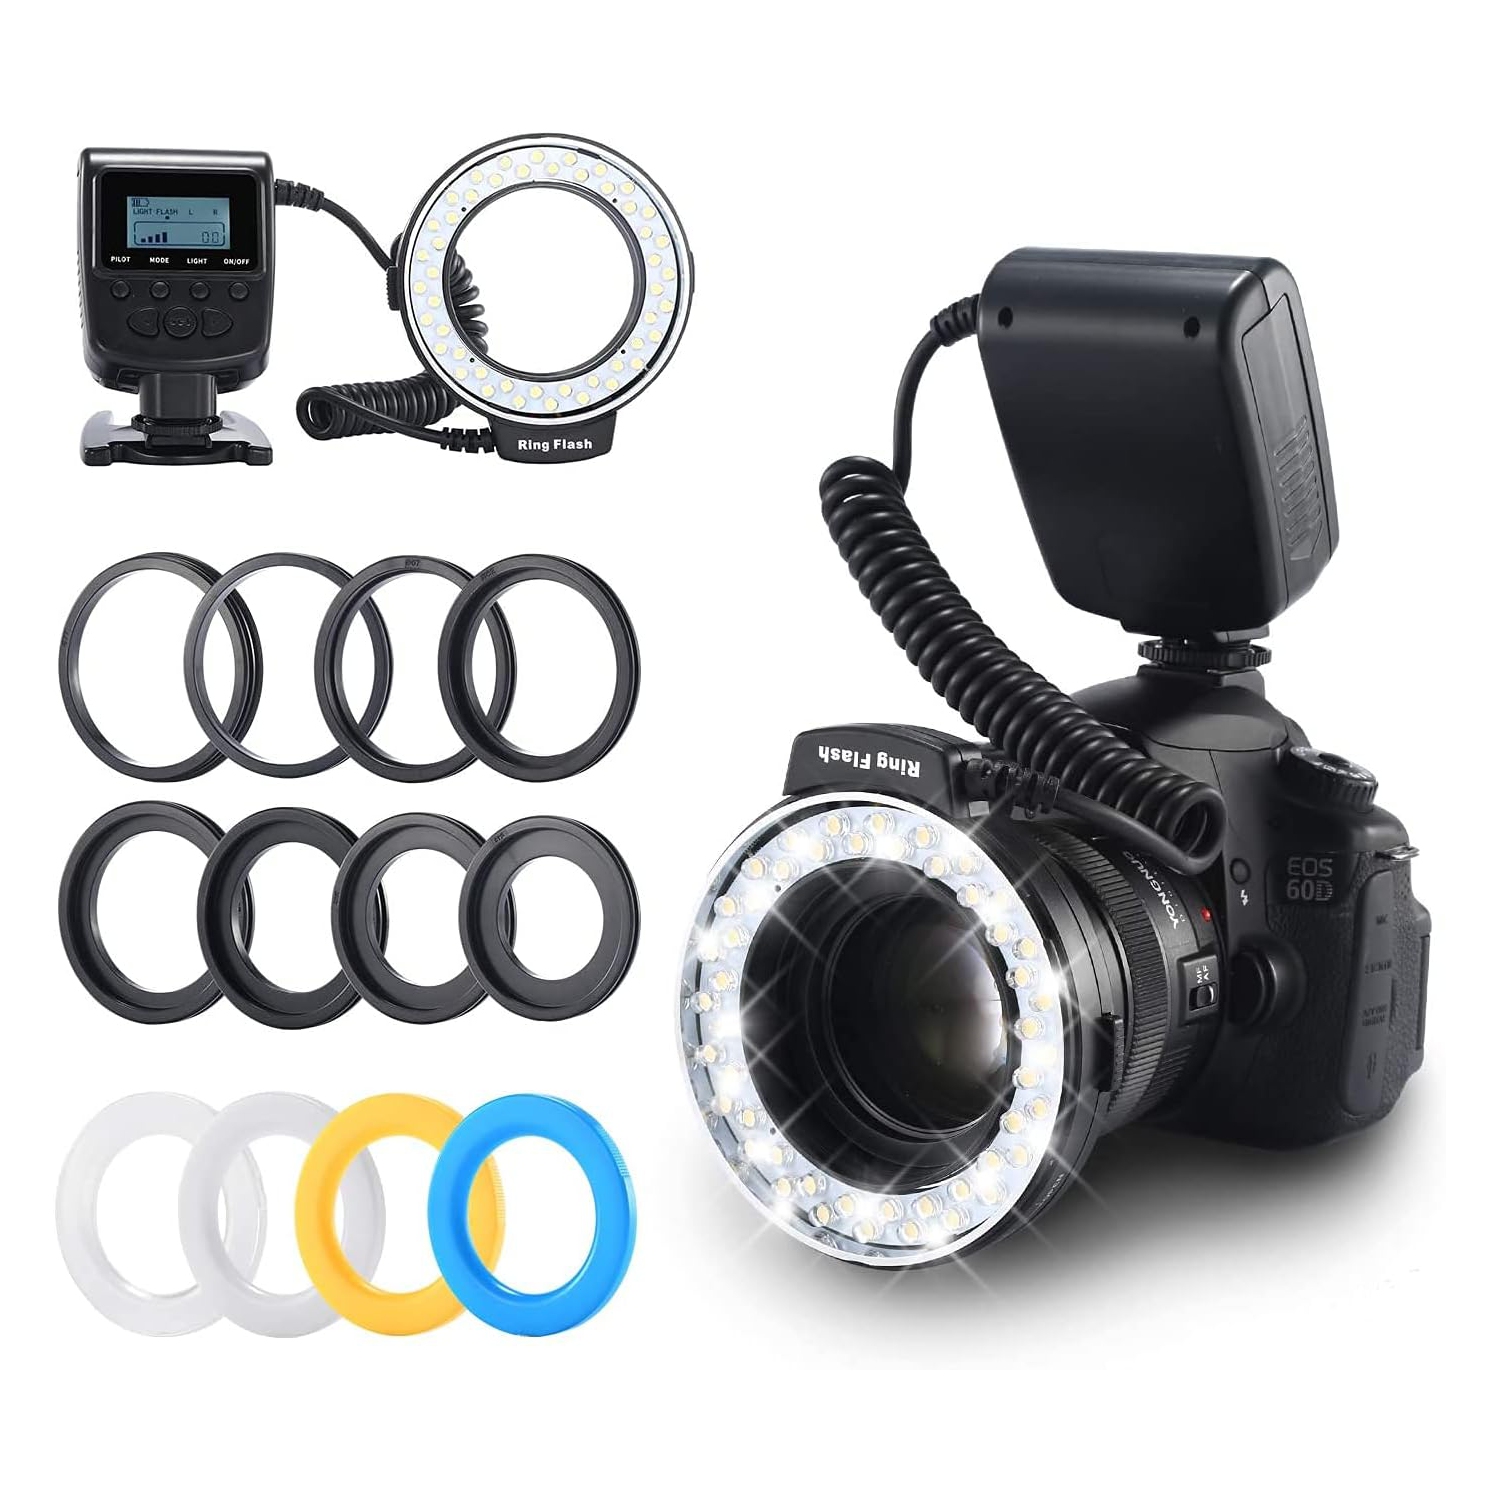 Ring Flash, E 48 Macro LED Flash Light with LCD Display Power Control, Adapter Rings and Flash Diffuser for Canon, Nikon DSLR Cameras